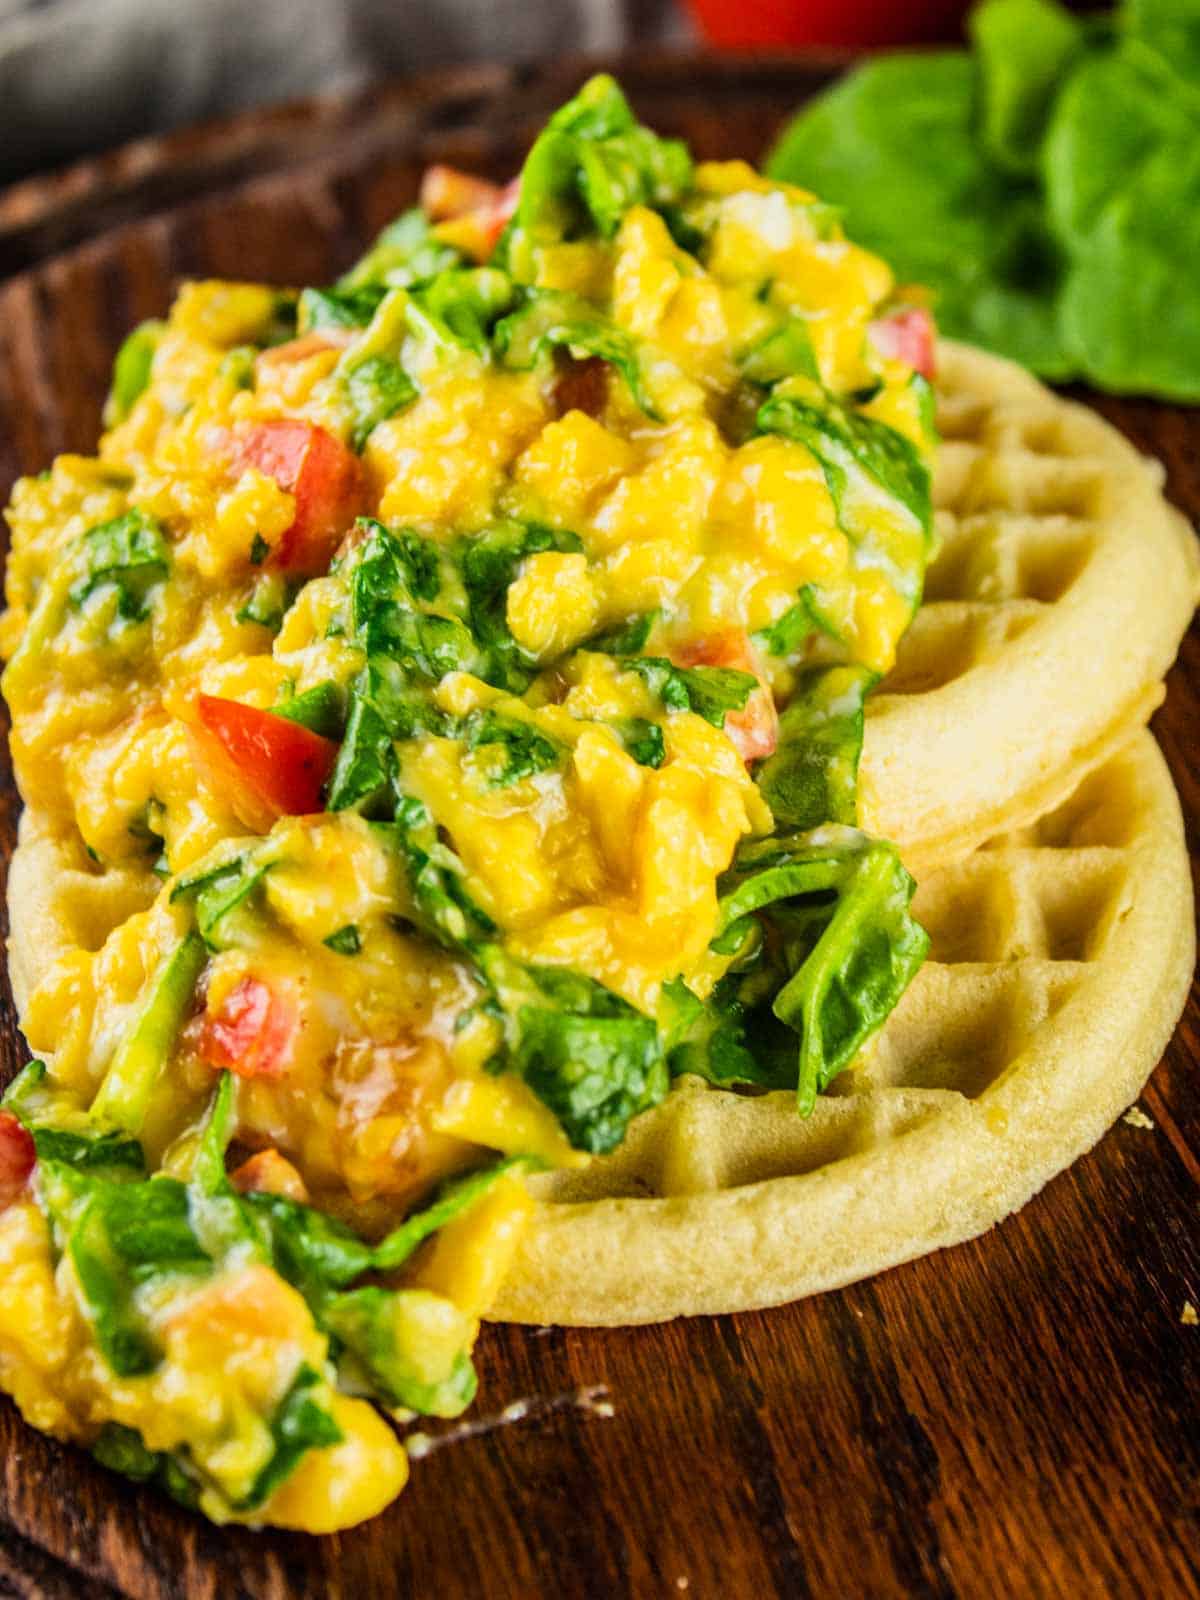 scrambled eggs with spinach and tomato on top of two waffles.